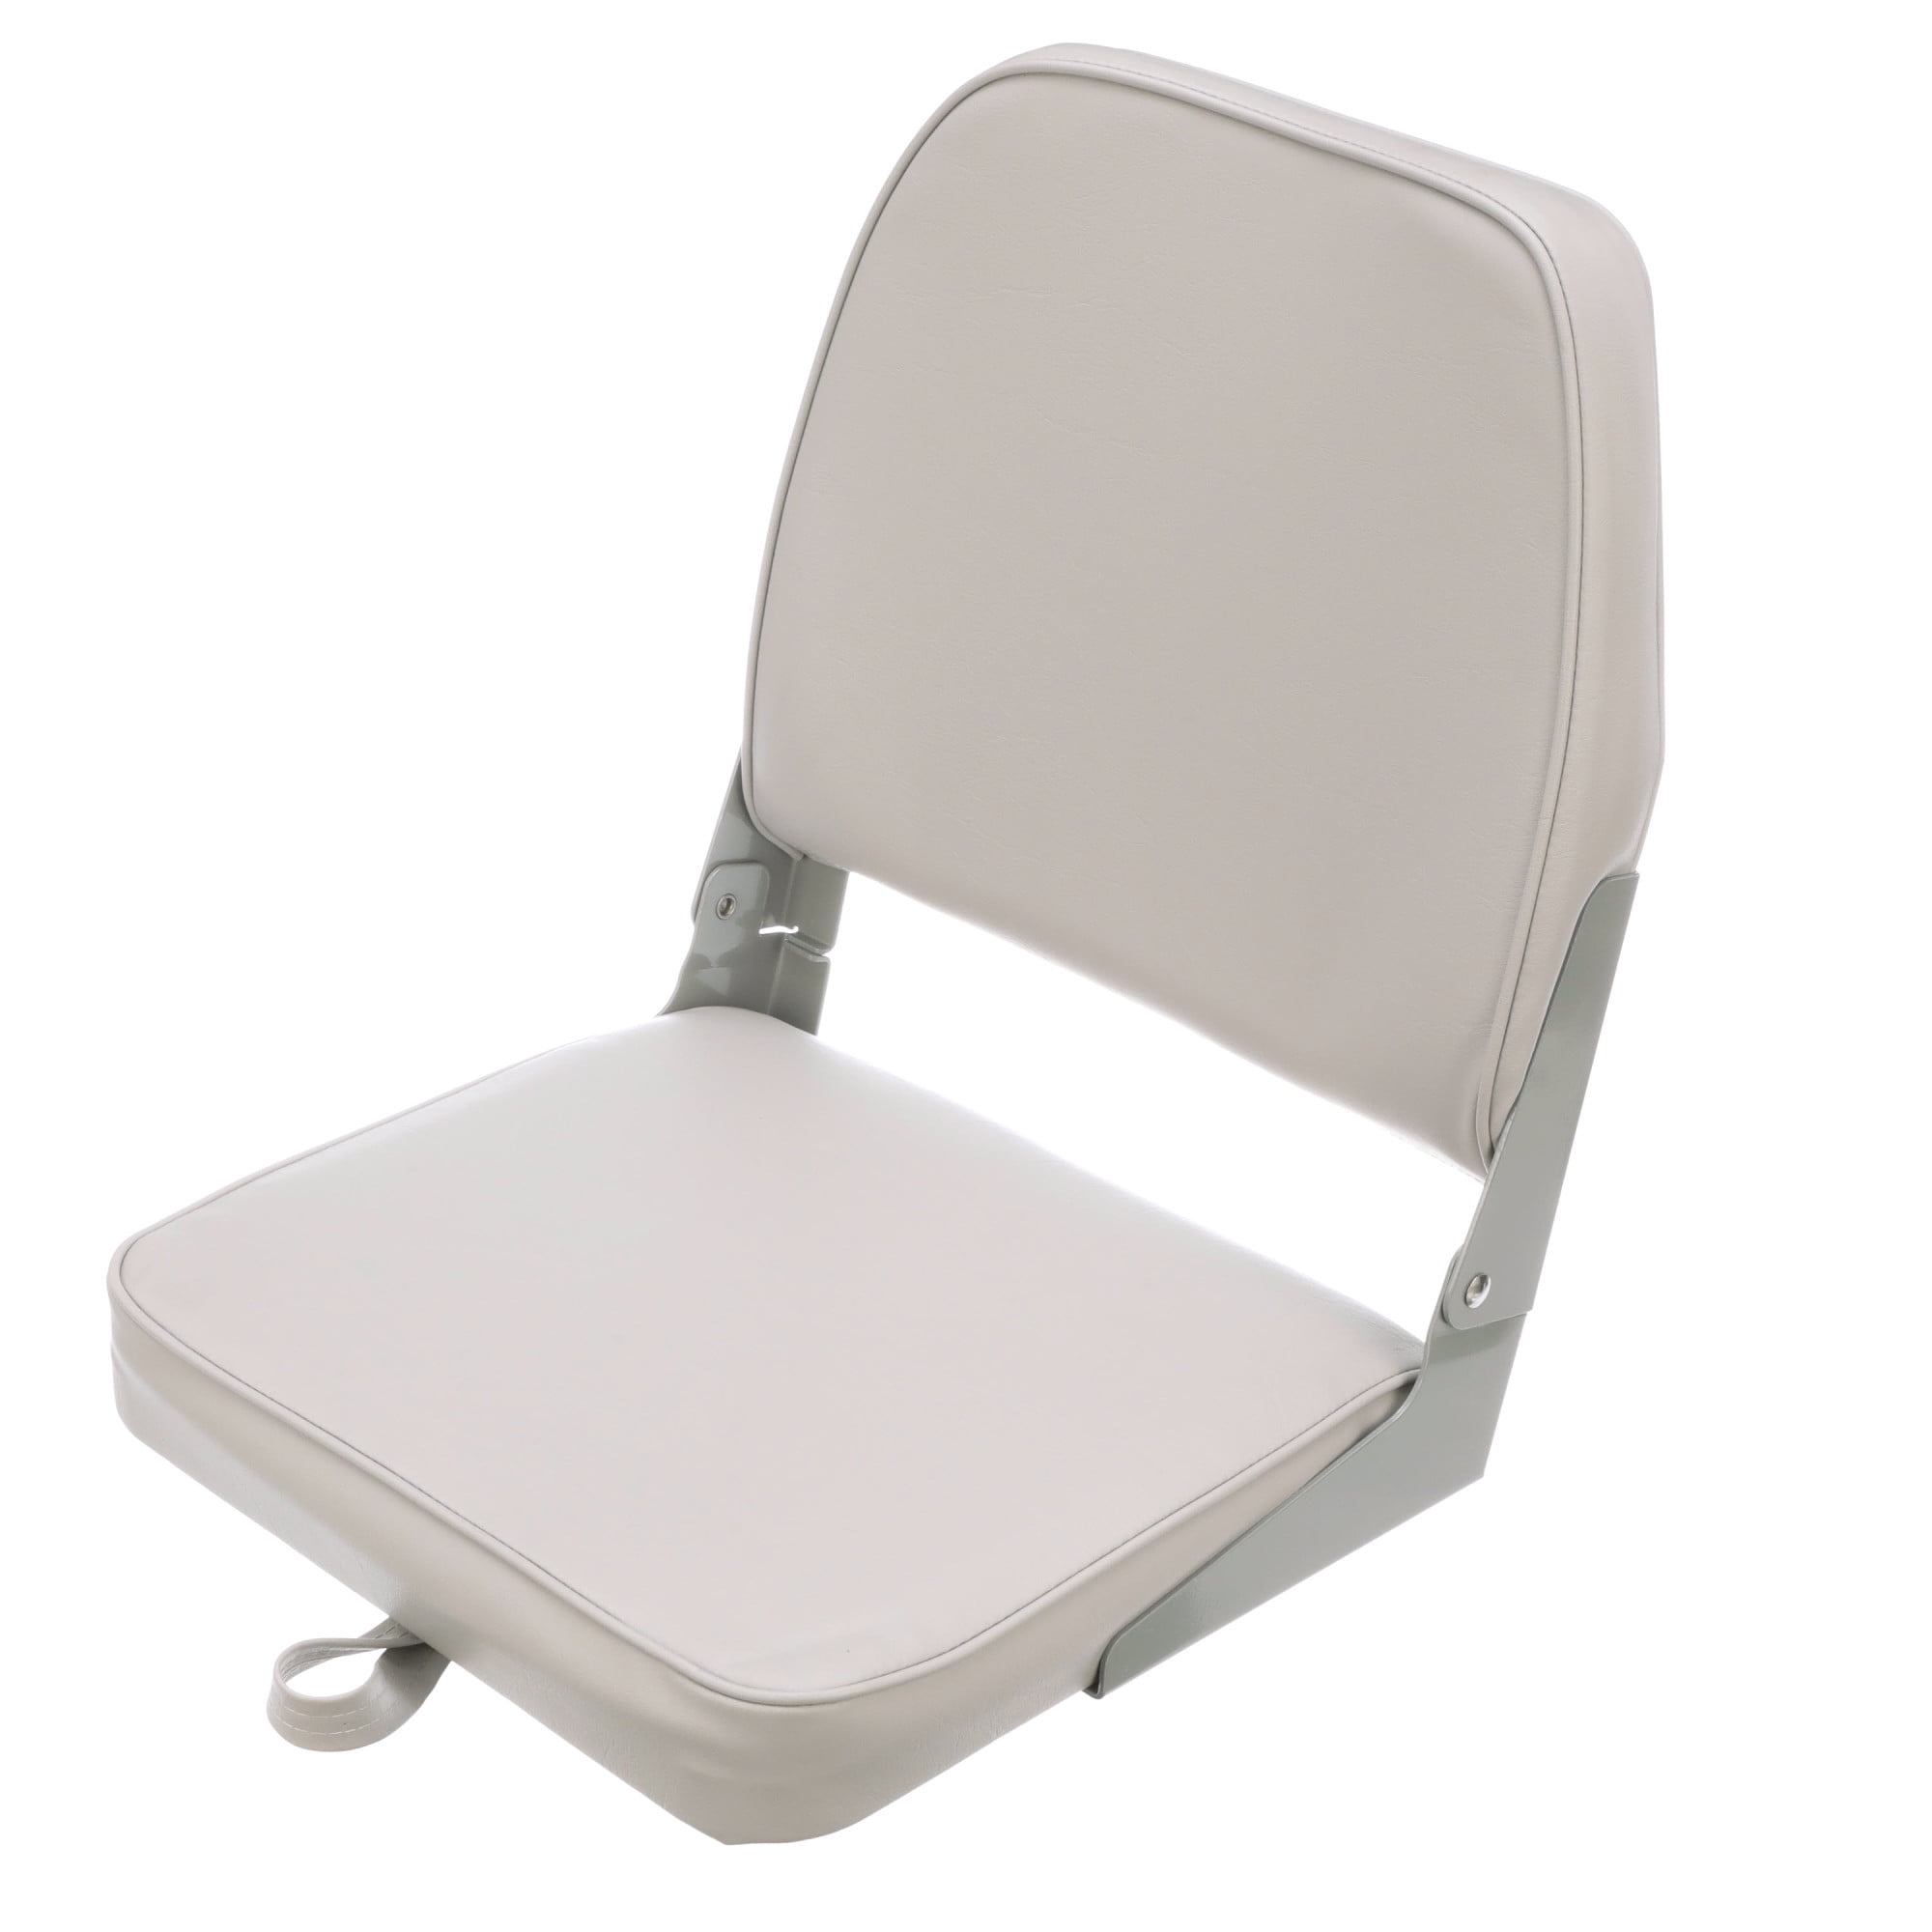 MILLENNIUM MARINE BOAT SEAT GREY B100GY OVER 505 Sold 